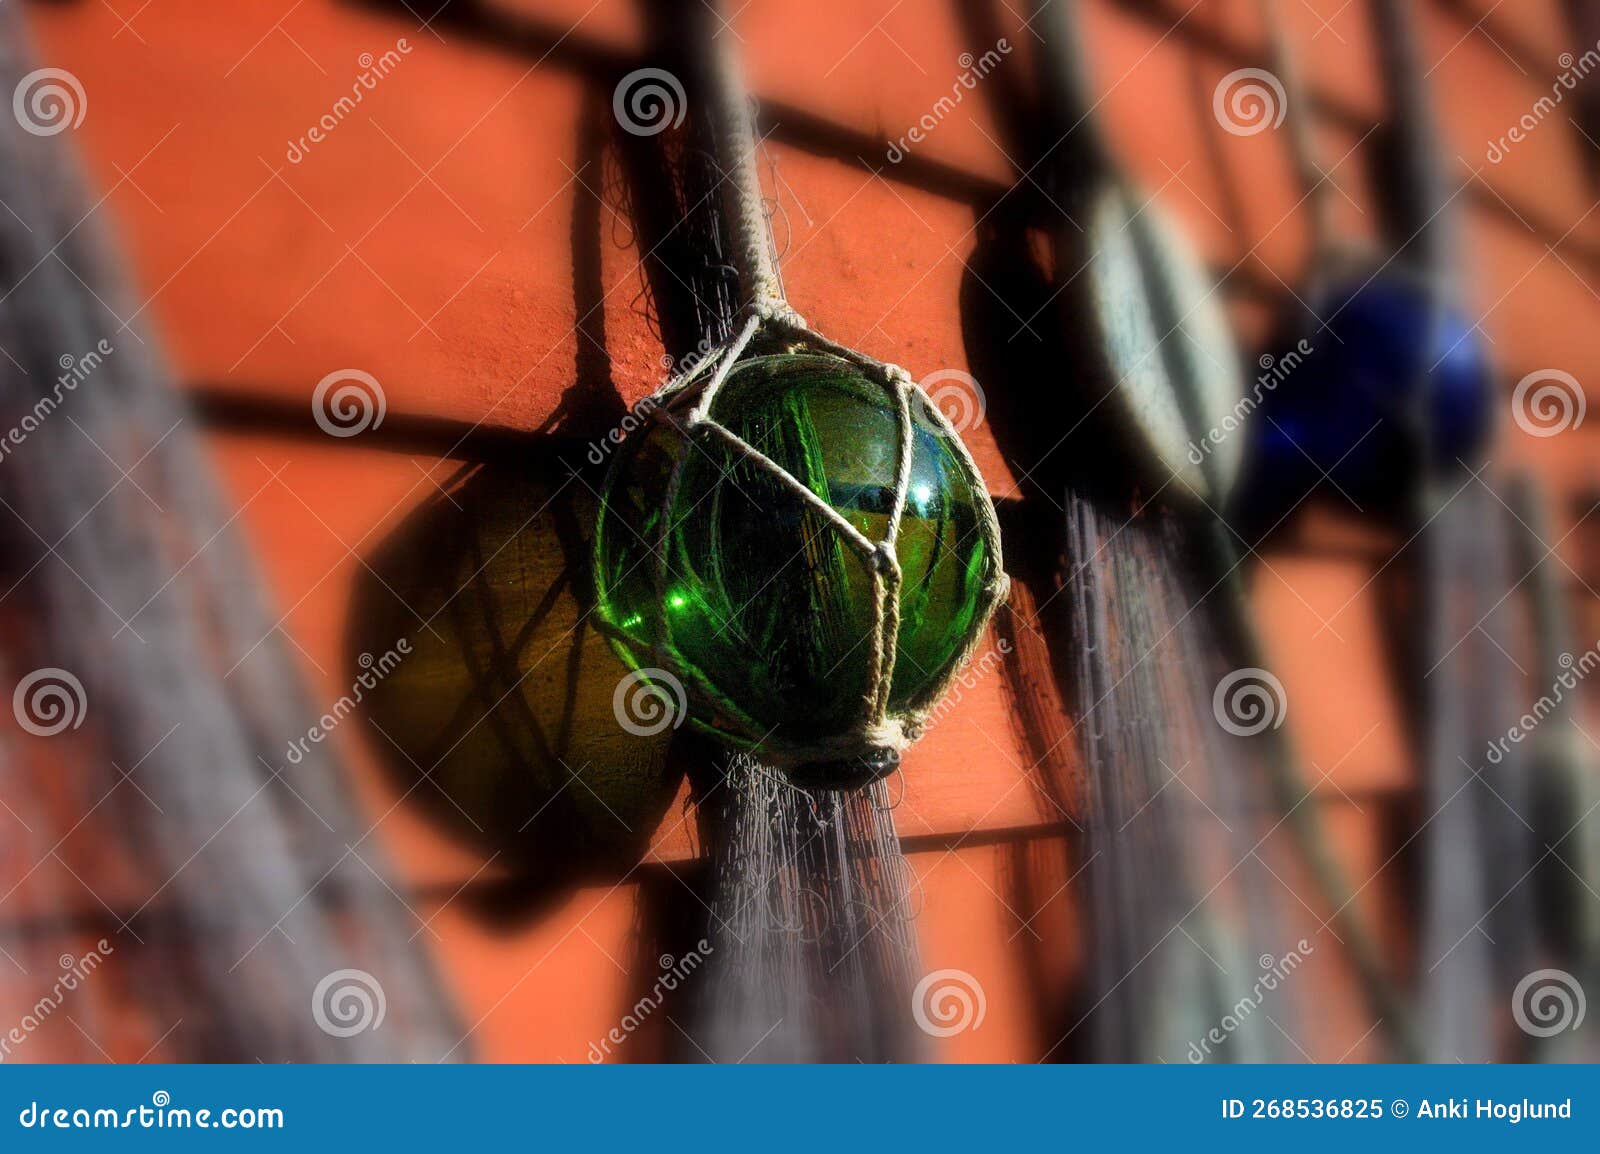 https://thumbs.dreamstime.com/z/old-fashioned-fishing-net-colorful-glass-balls-bobbers-hanging-red-wall-268536825.jpg